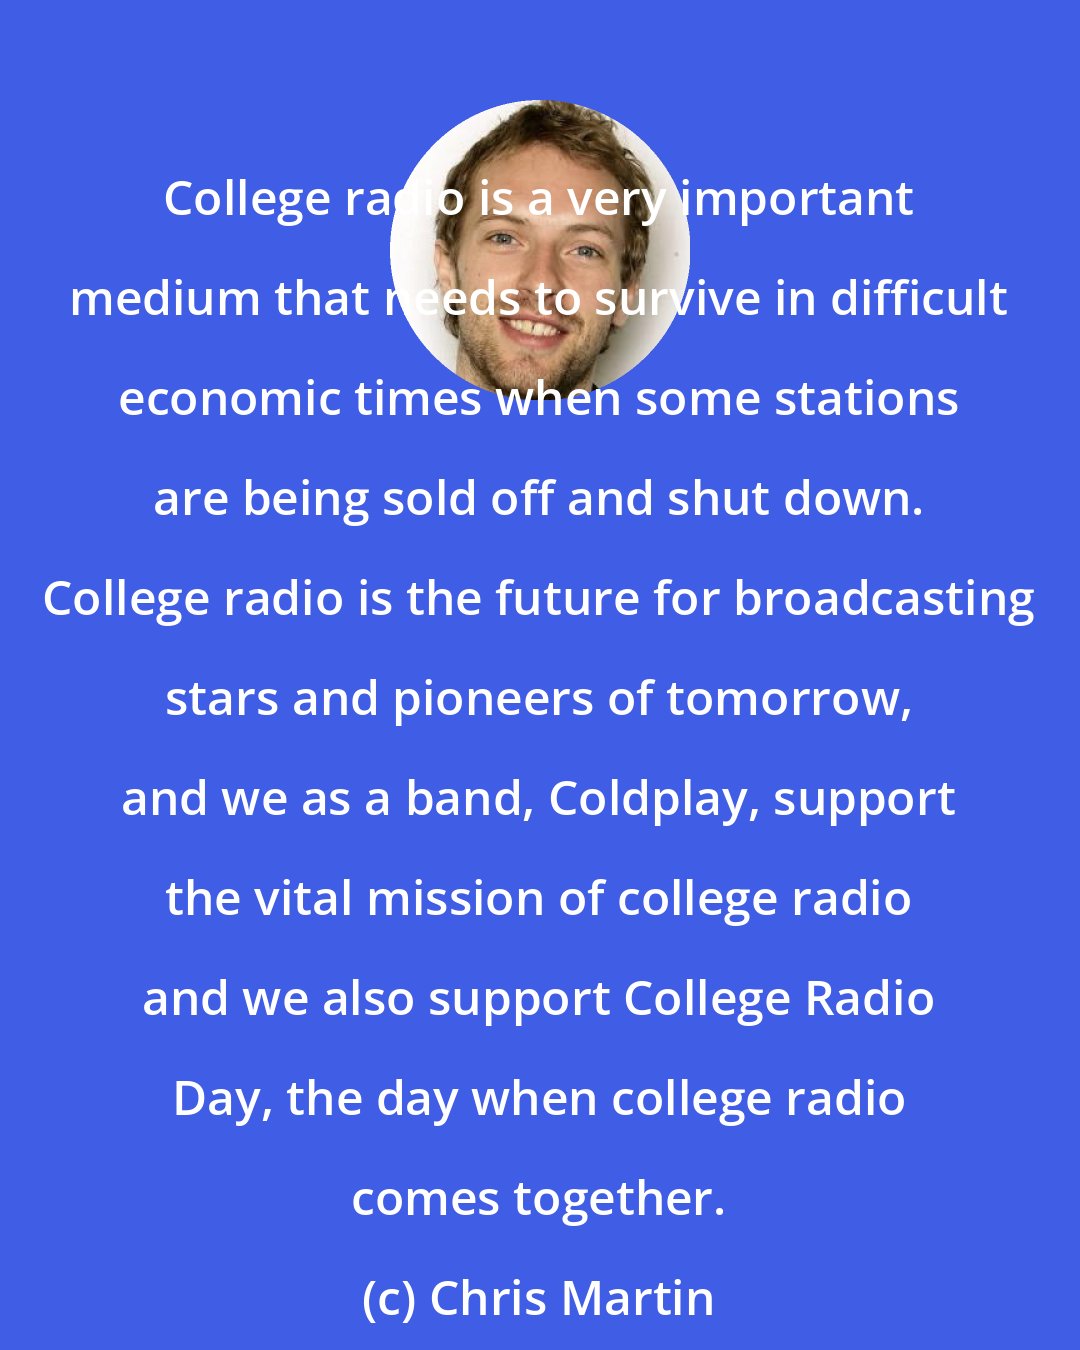 Chris Martin: College radio is a very important medium that needs to survive in difficult economic times when some stations are being sold off and shut down. College radio is the future for broadcasting stars and pioneers of tomorrow, and we as a band, Coldplay, support the vital mission of college radio and we also support College Radio Day, the day when college radio comes together.